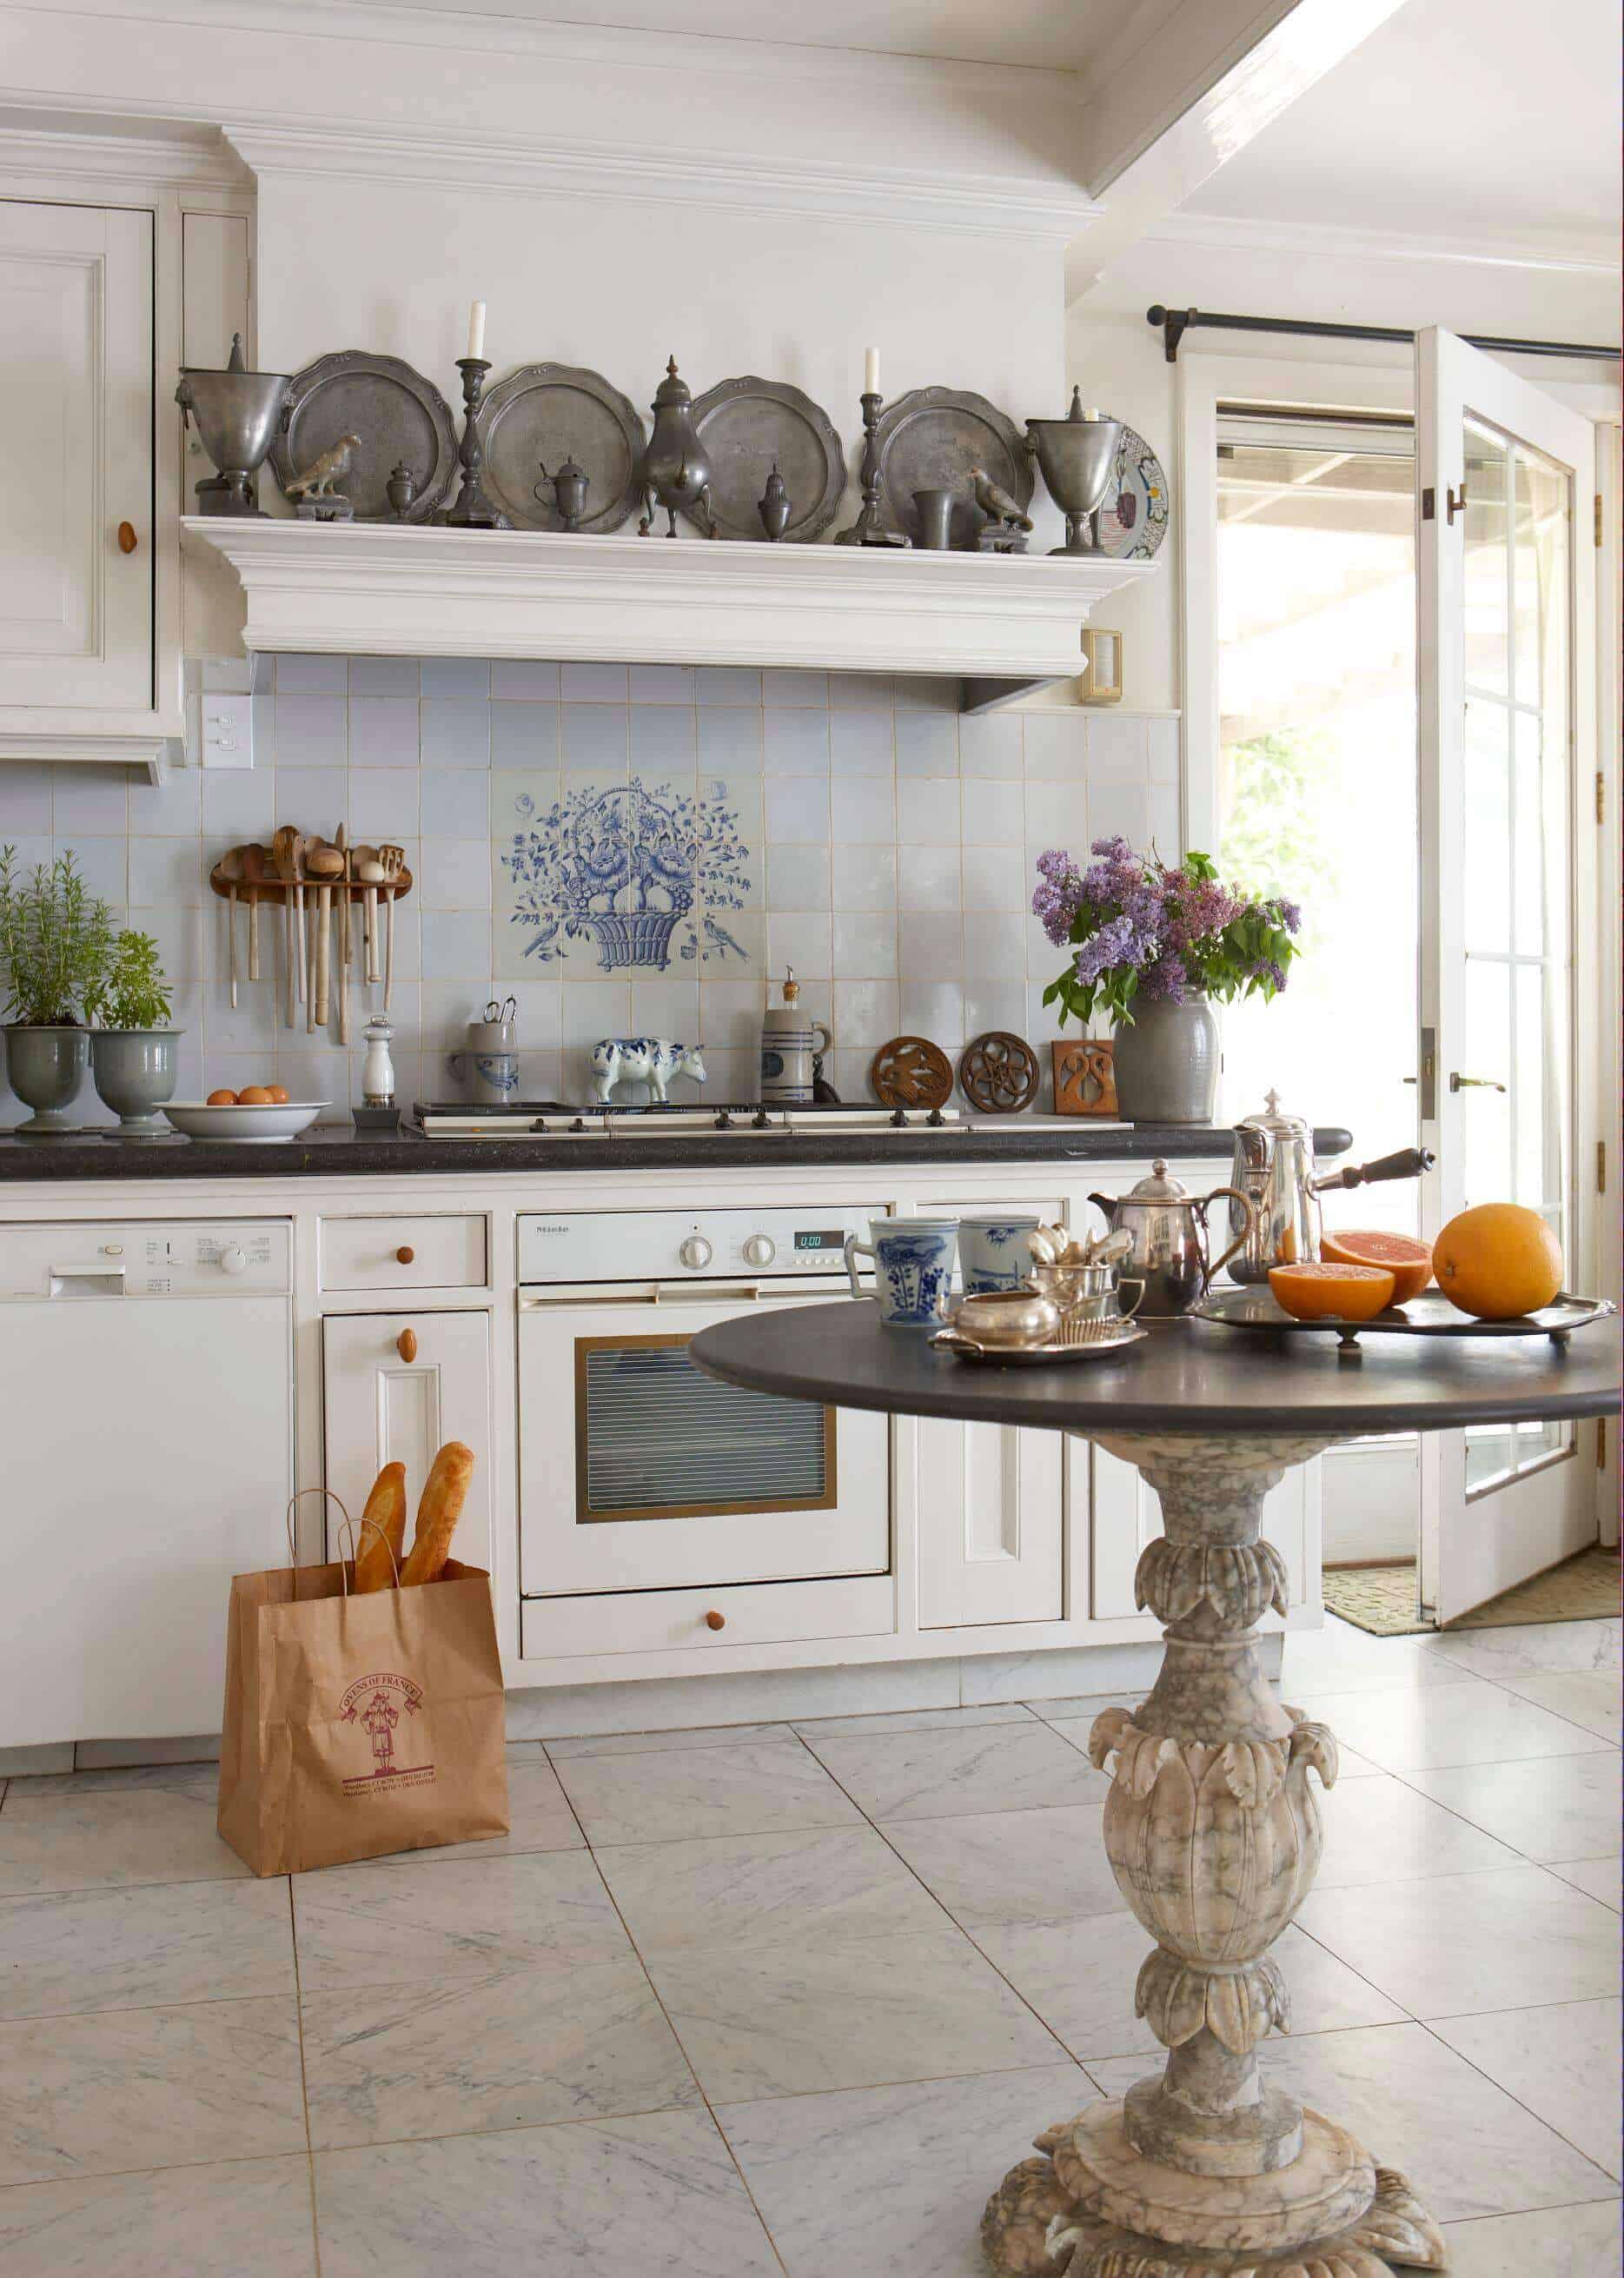 These French kitchen design pictures work as a useful tool for you to add to your decor vision board and planner for your new home kitchen. We invite you to pay attention to what makes these kitchens part of the French kitchen design. For more beautiful ideas go to https://thekitchenvibe.com